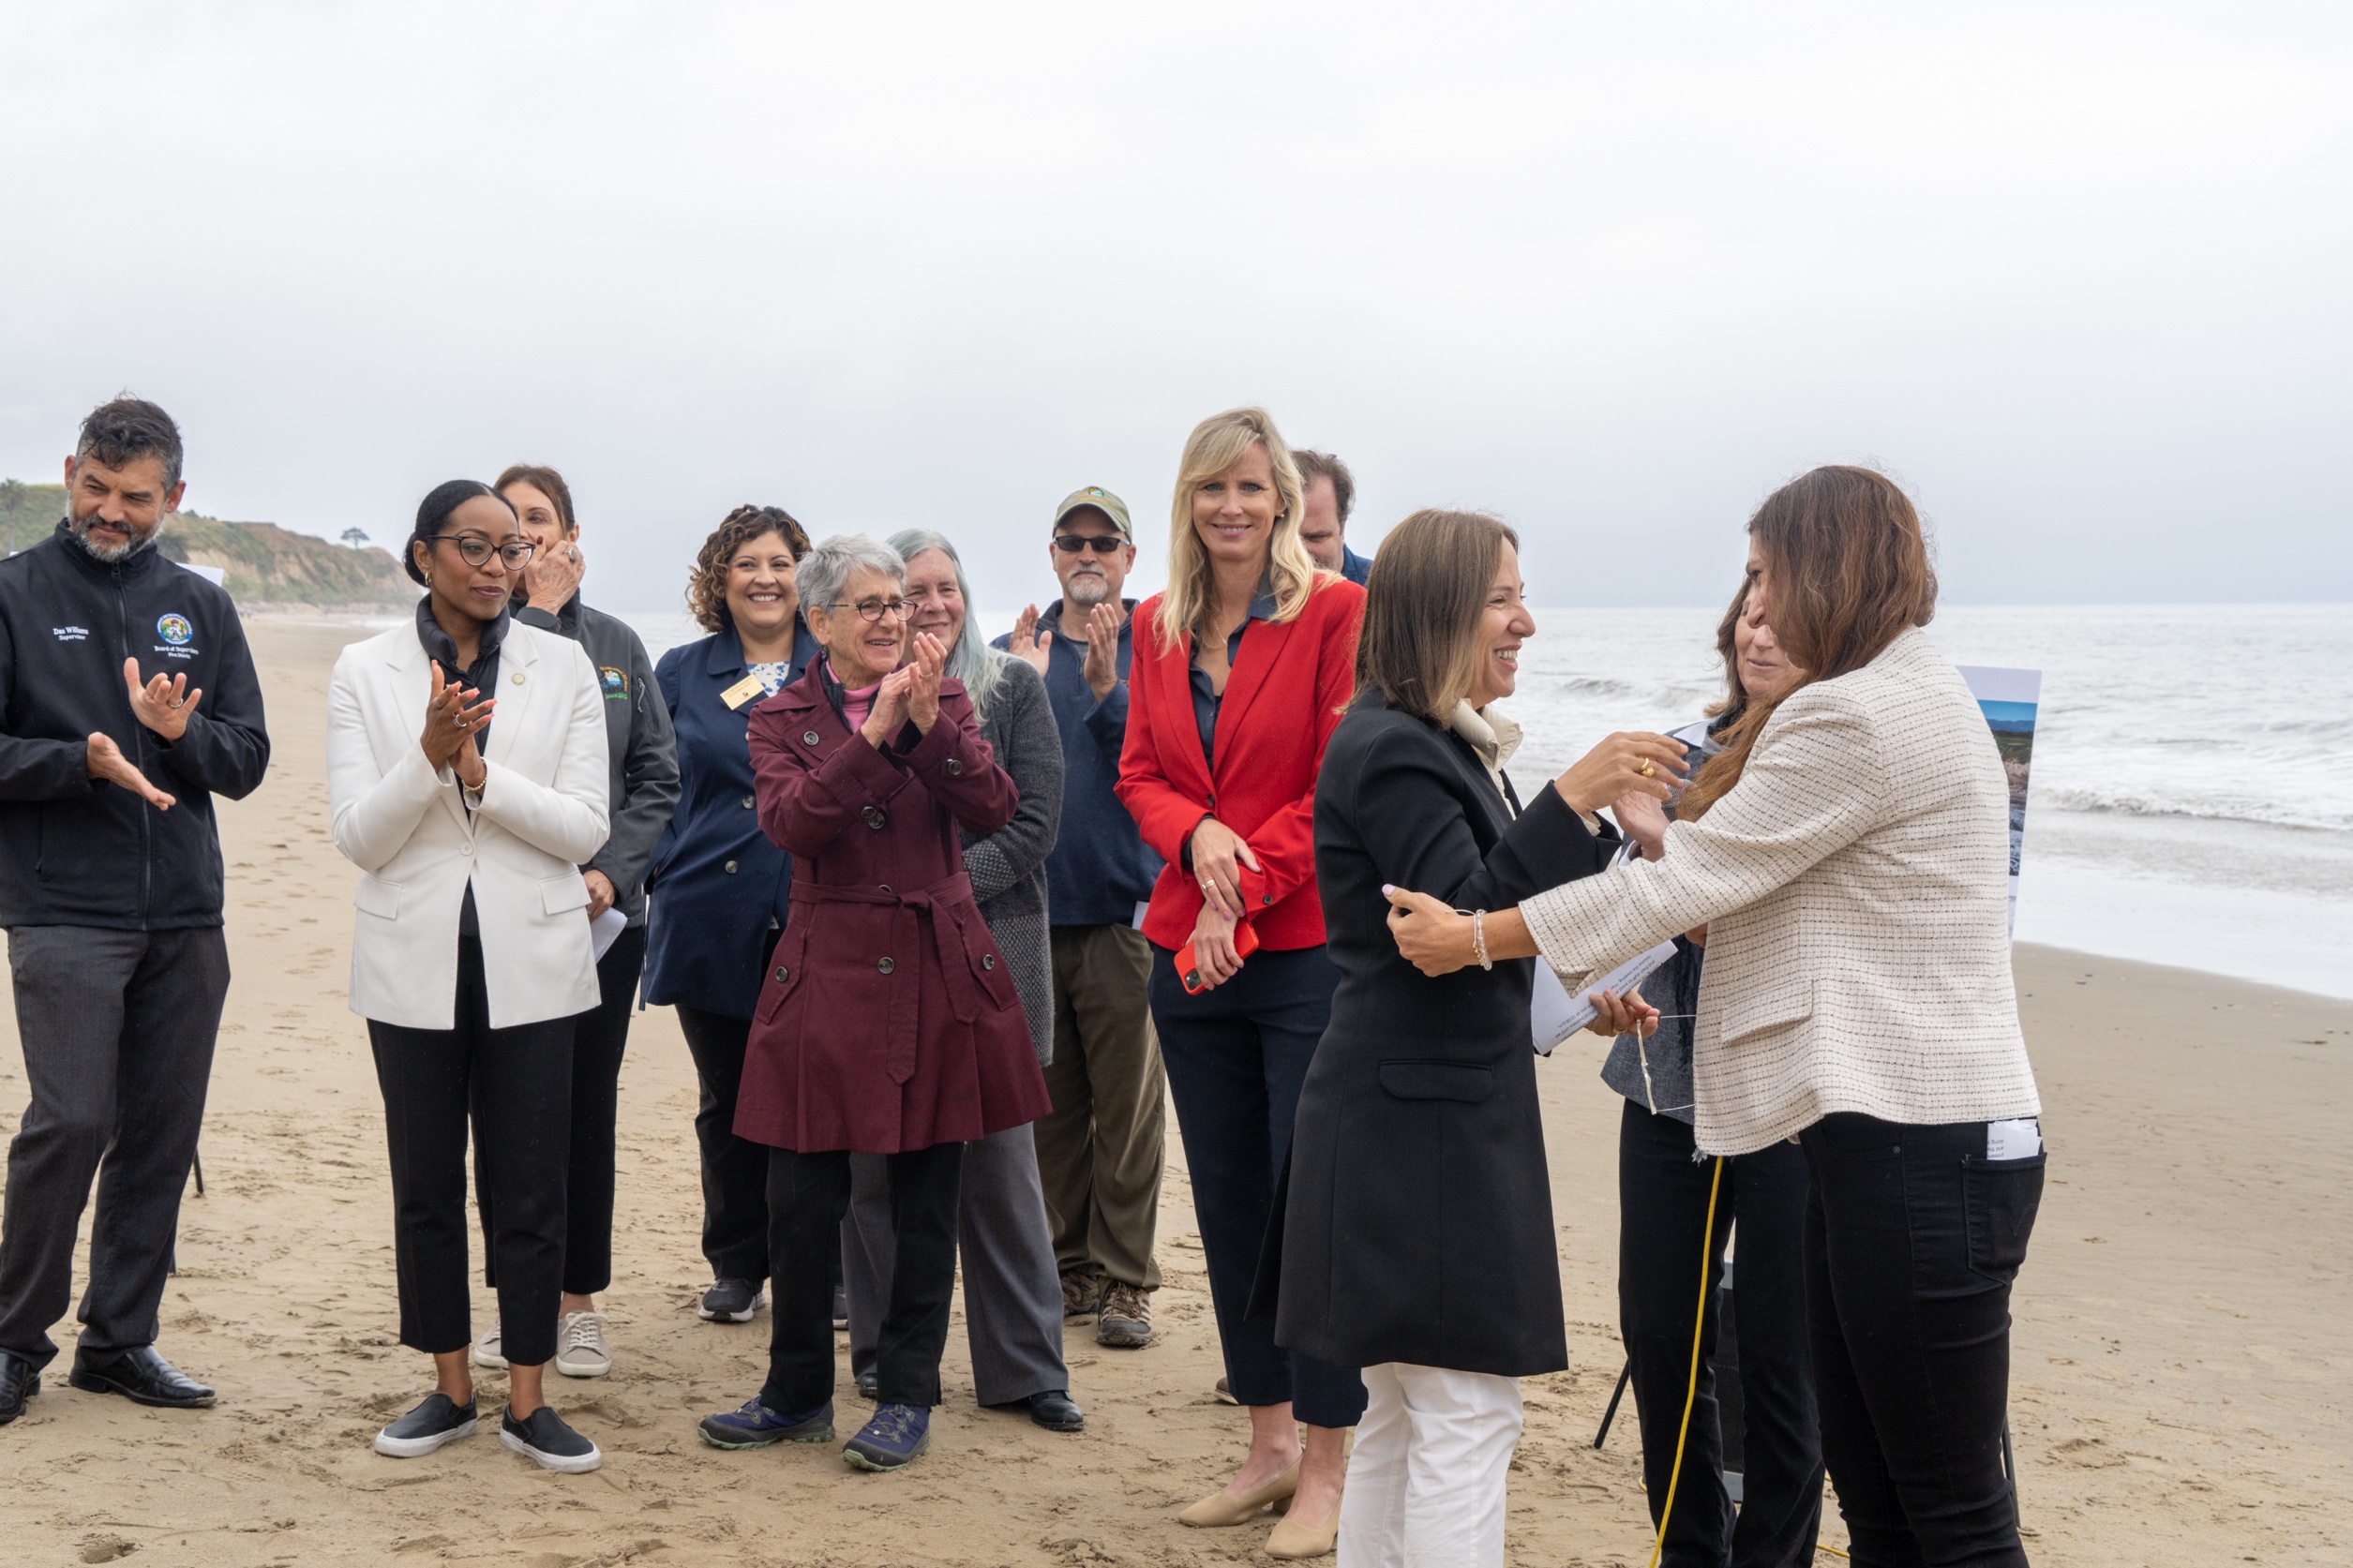 Image of Lt. Governor on Haskells Beach in Goleta for a Press Conference